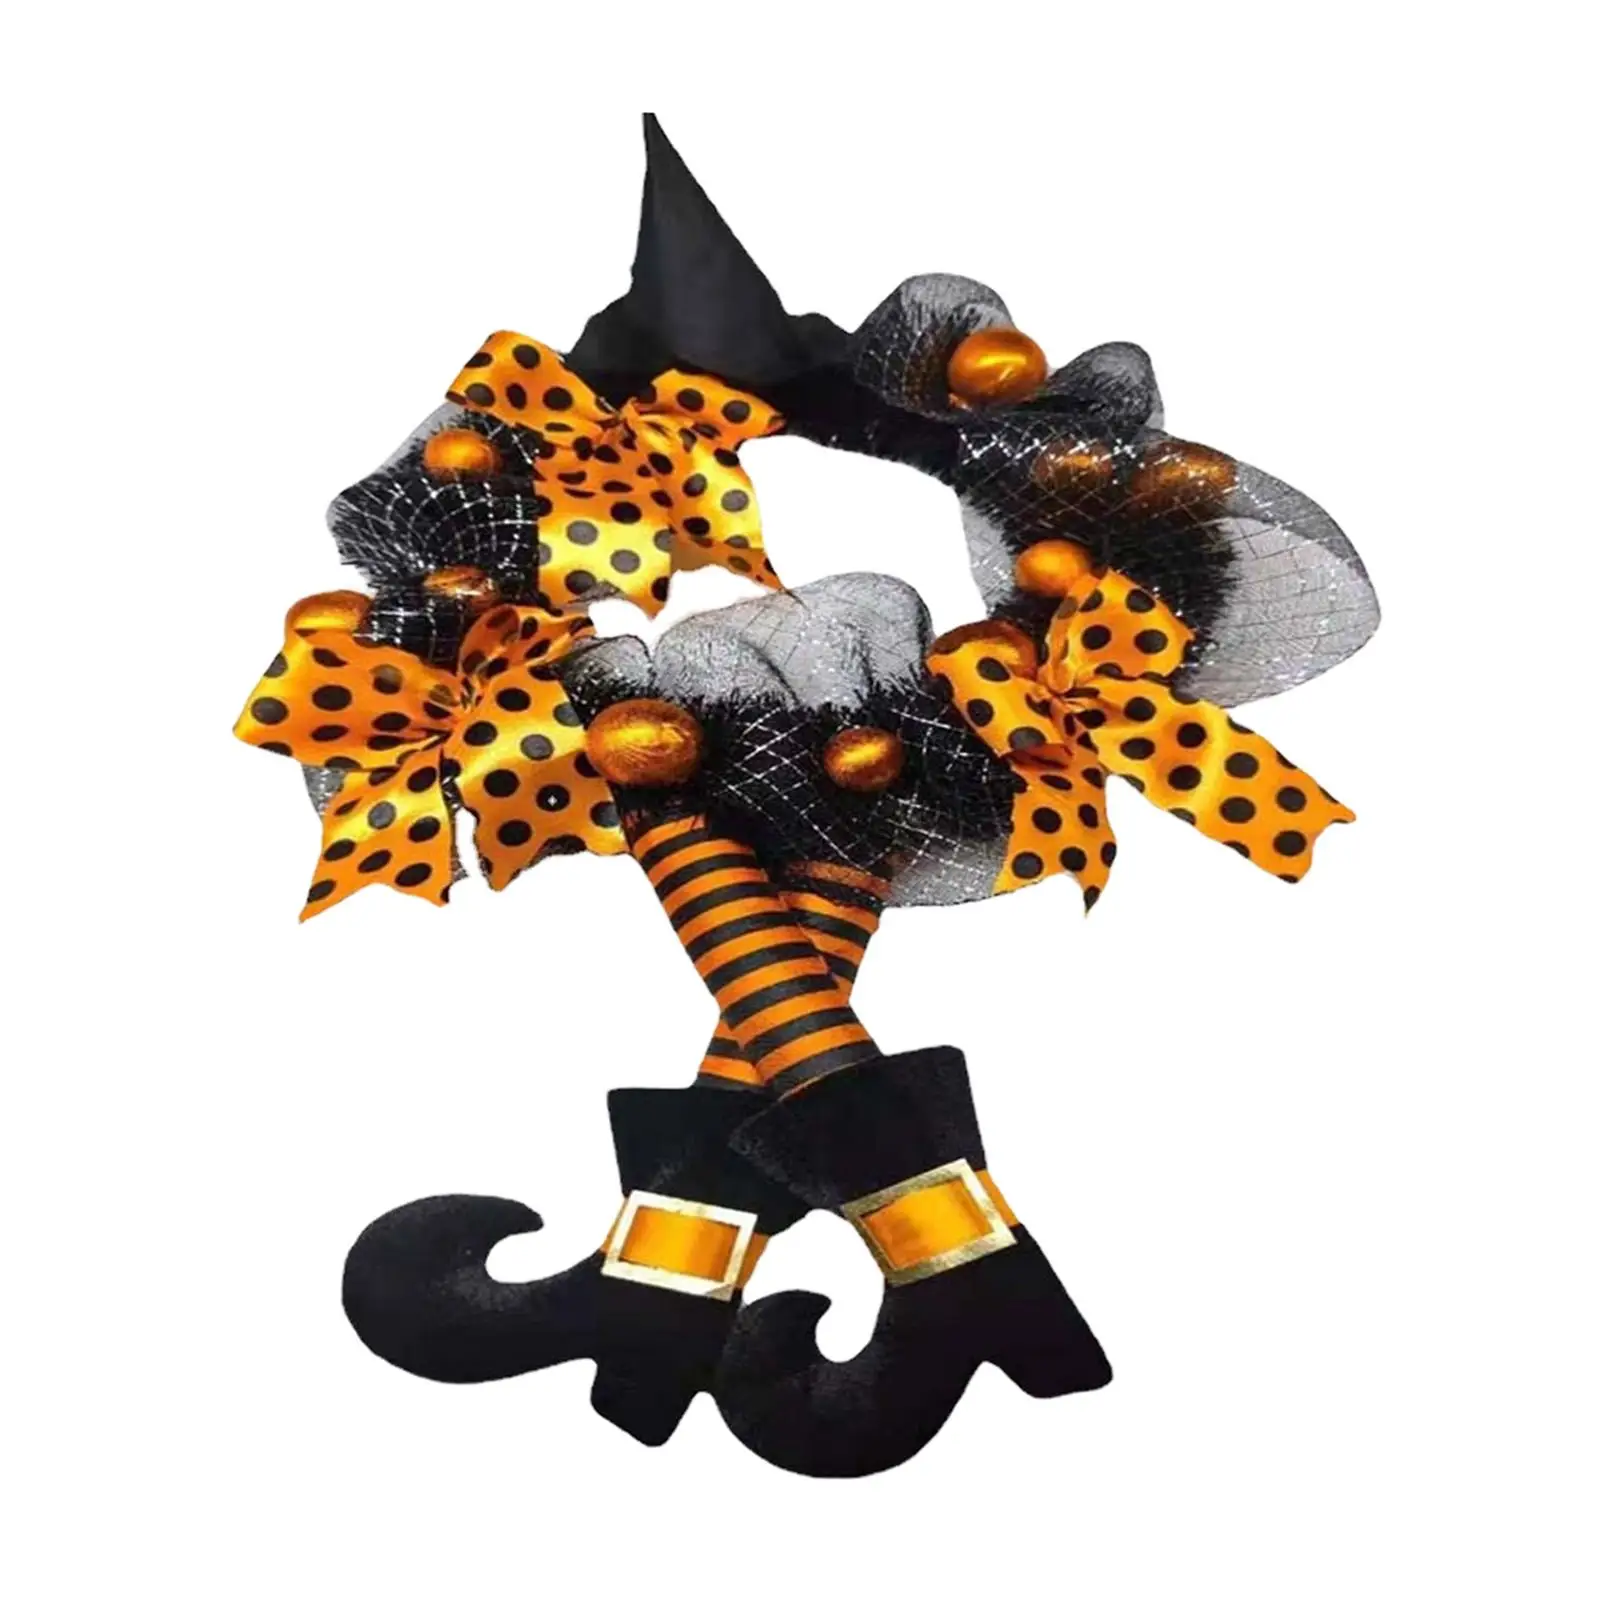 Happy Halloween Wreath with Ribbon Ornaments Witch Hat and Legs Wreath Decorative Wreath for Door Mantle Festival Decor